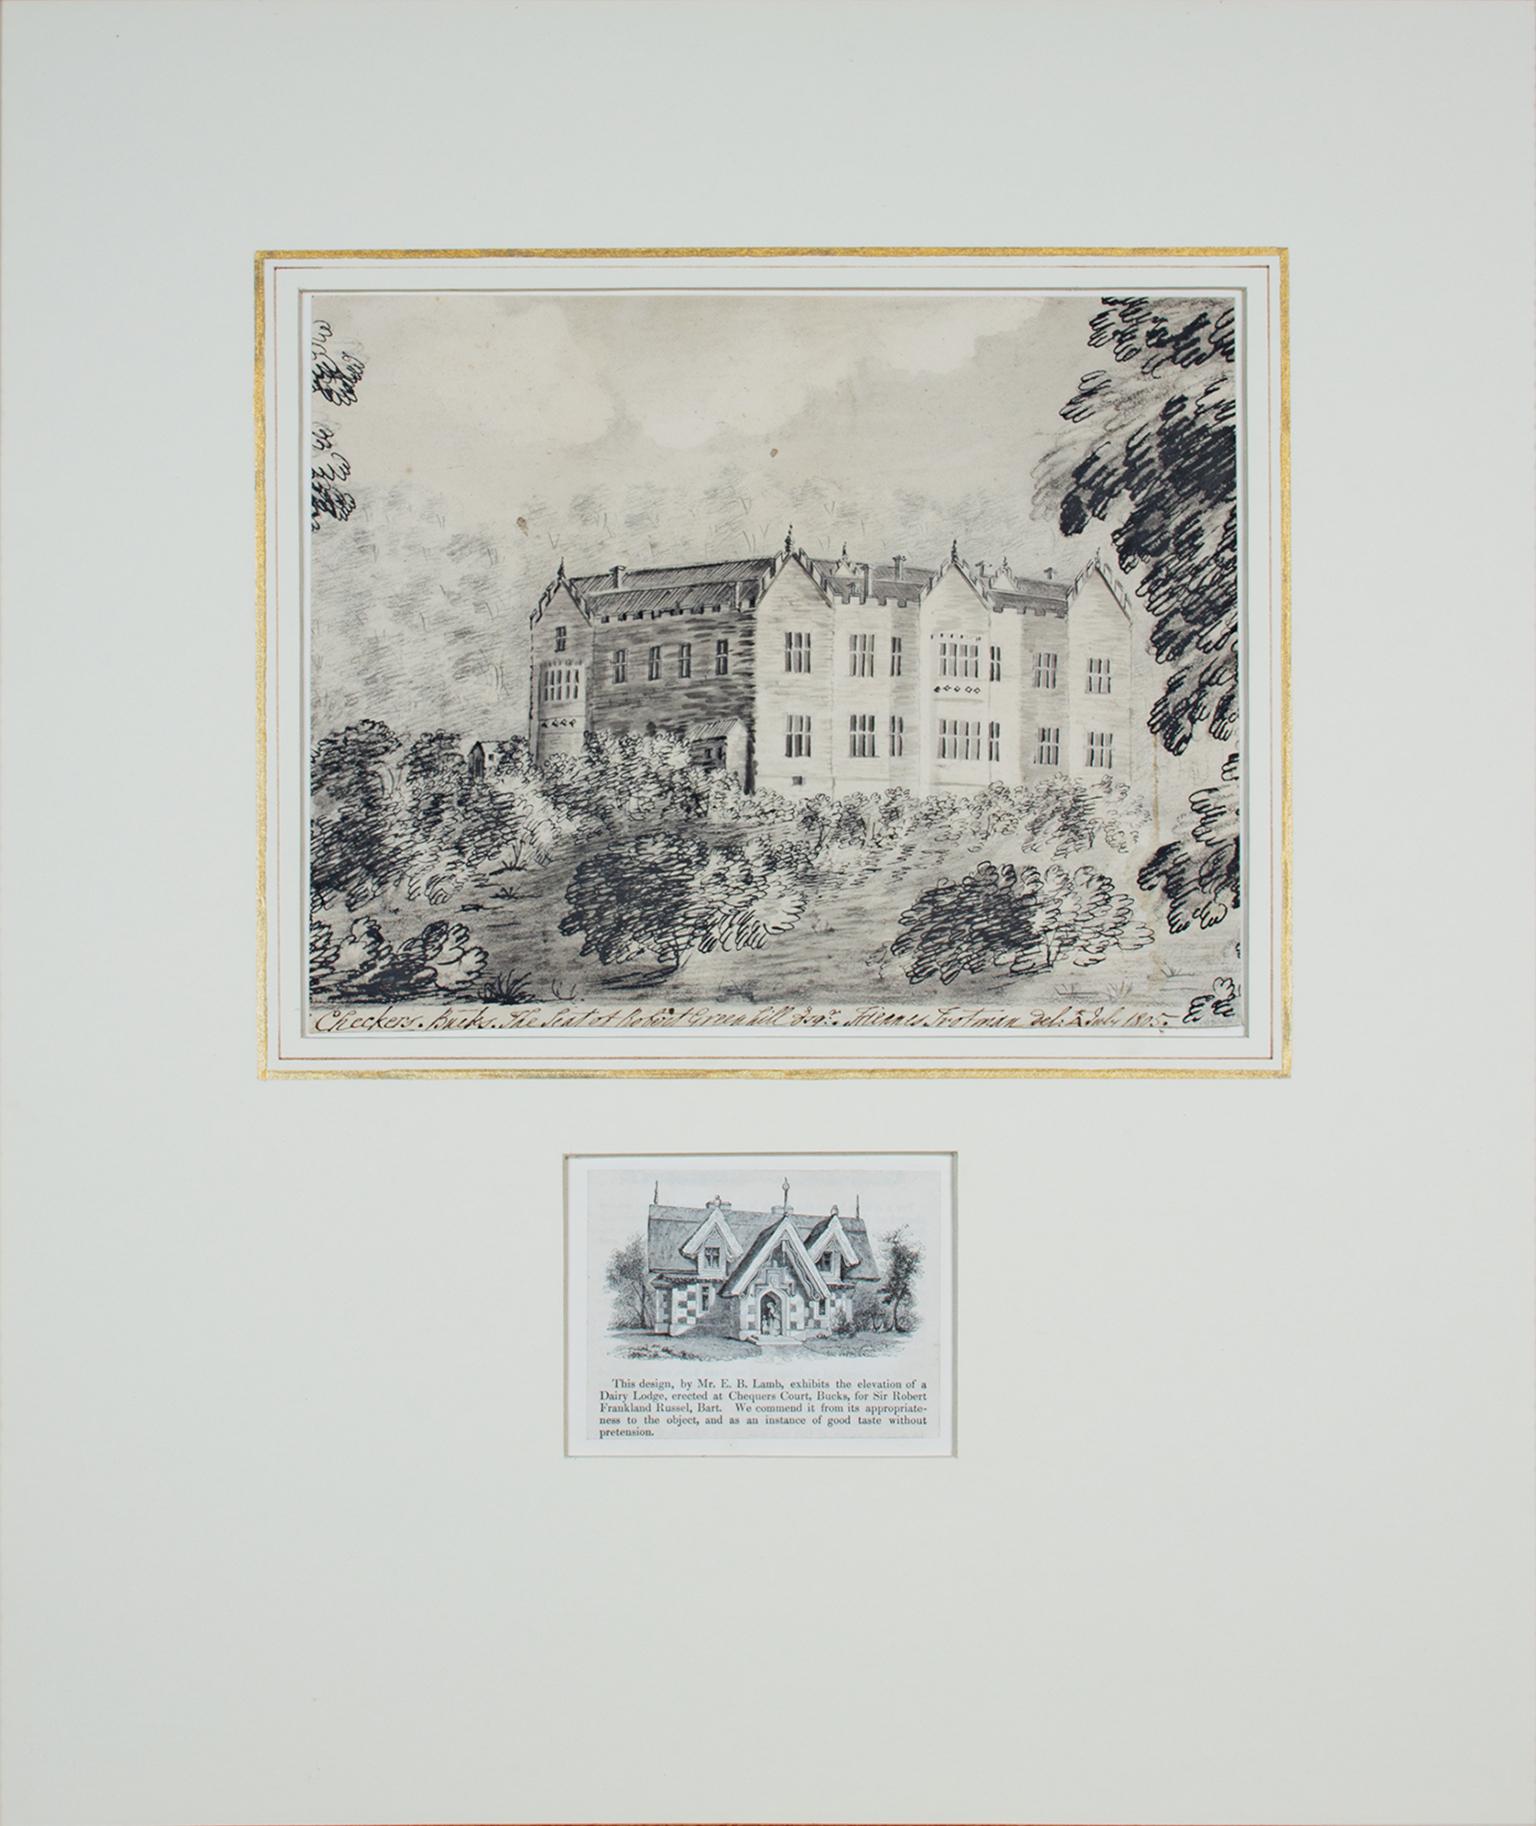 Fiennes Trotman Landscape Art - "View of Chequers Court, " Pencil & Ink by F. Trotman from Rothschild estate